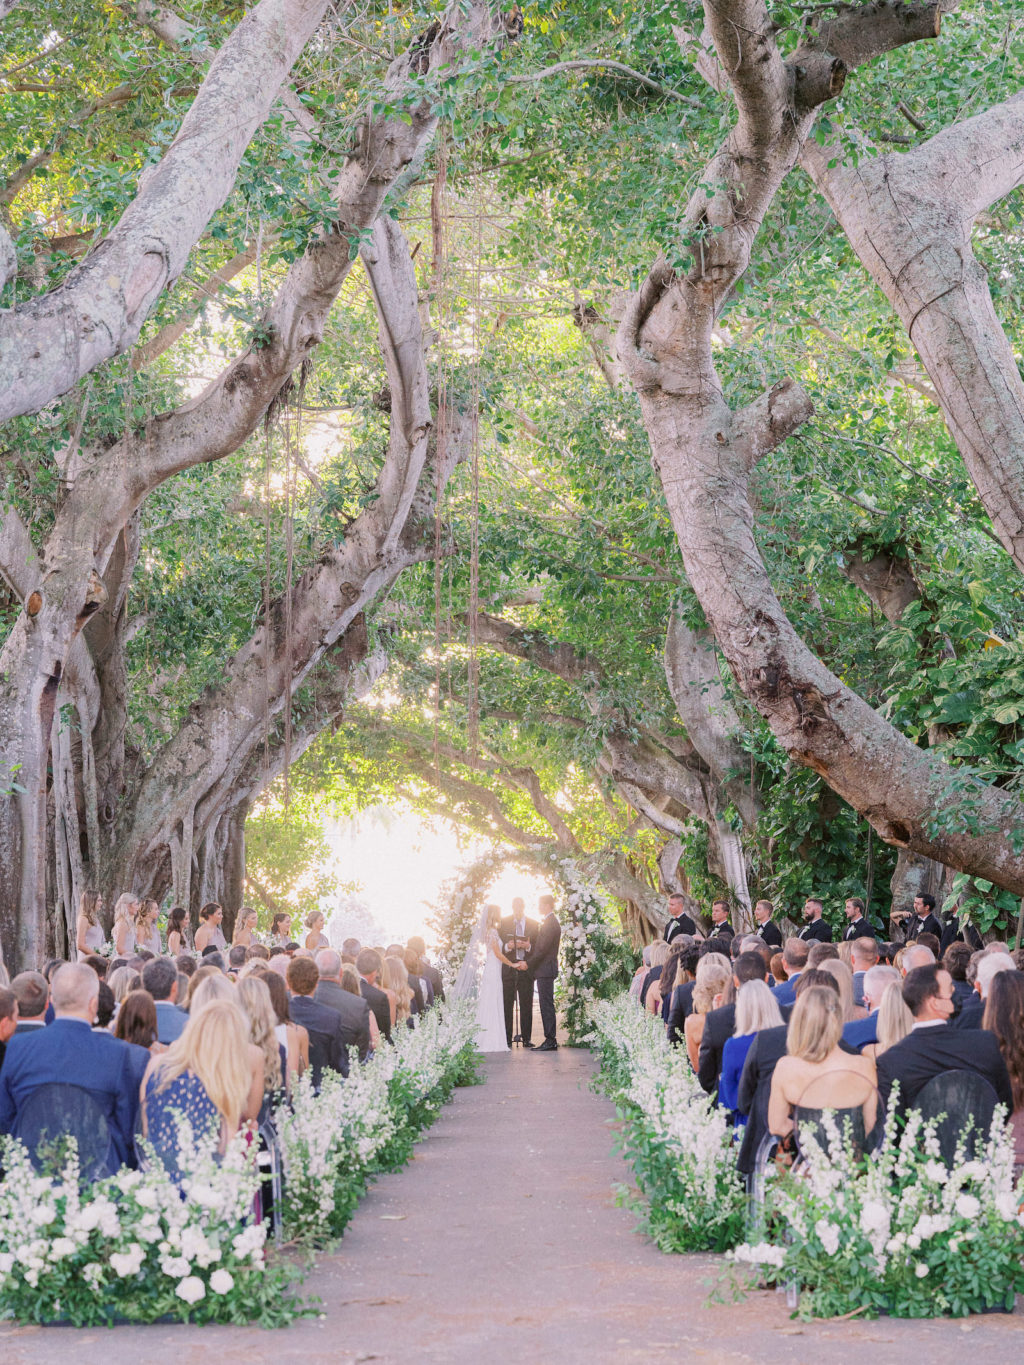 Classic Luxurious Elegant Florida Wedding Ceremony Under Banyan Trees Outdoor, Lush White and Greenery Floral Arrangements and Semi Circle Arch | Boca Grande Wedding Venue The Gasparilla Inn and Club